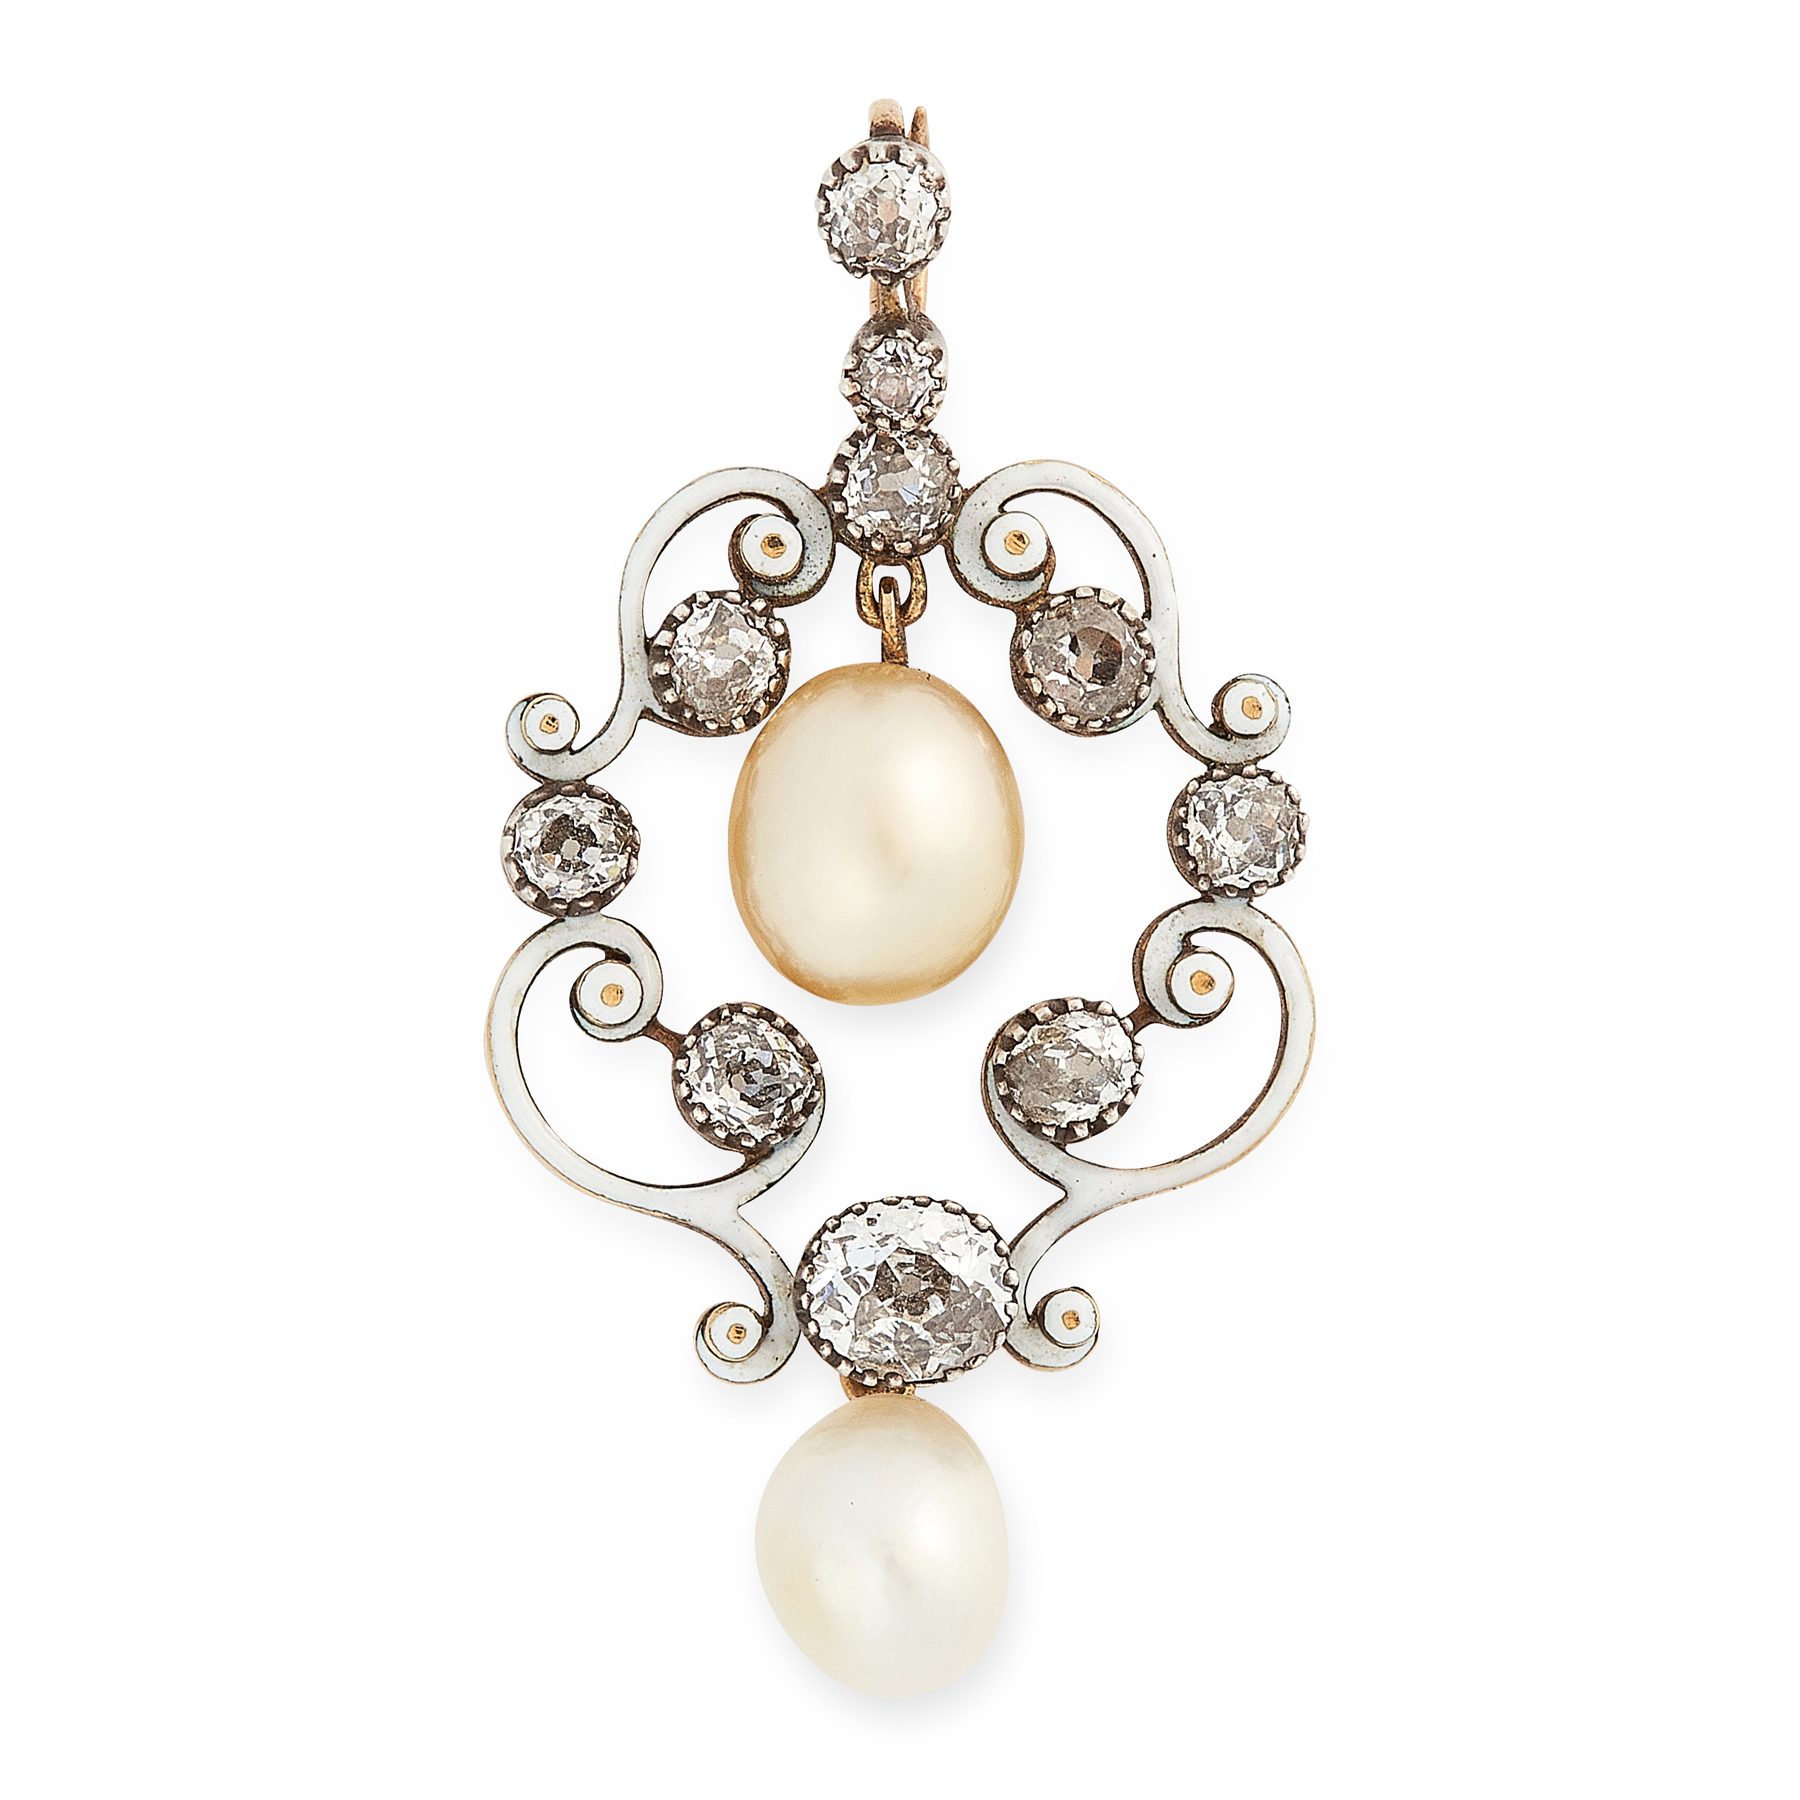 AN ANTIQUE NATURAL PEARL, DIAMOND AND ENAMEL PENDANT in yellow gold and silver, set with two natural